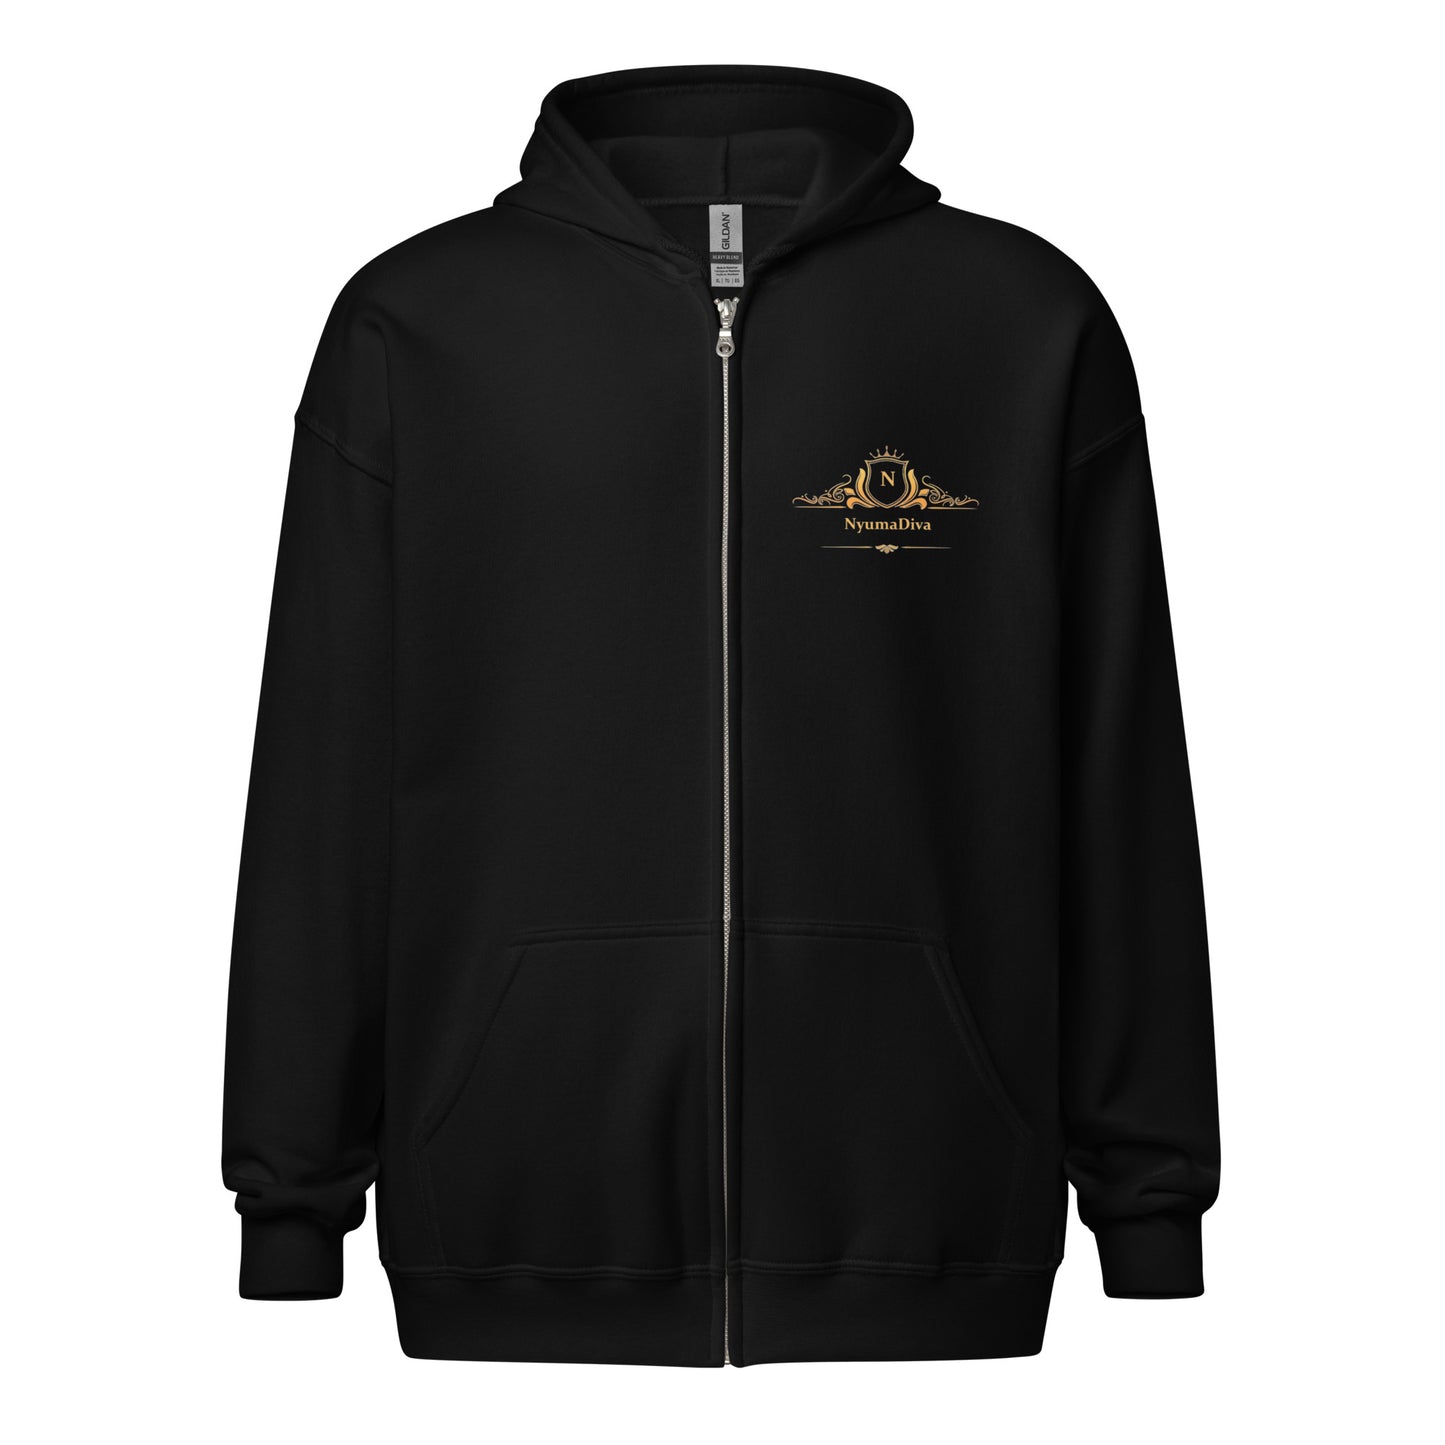 Never Give Up heavy blend zip hoodie